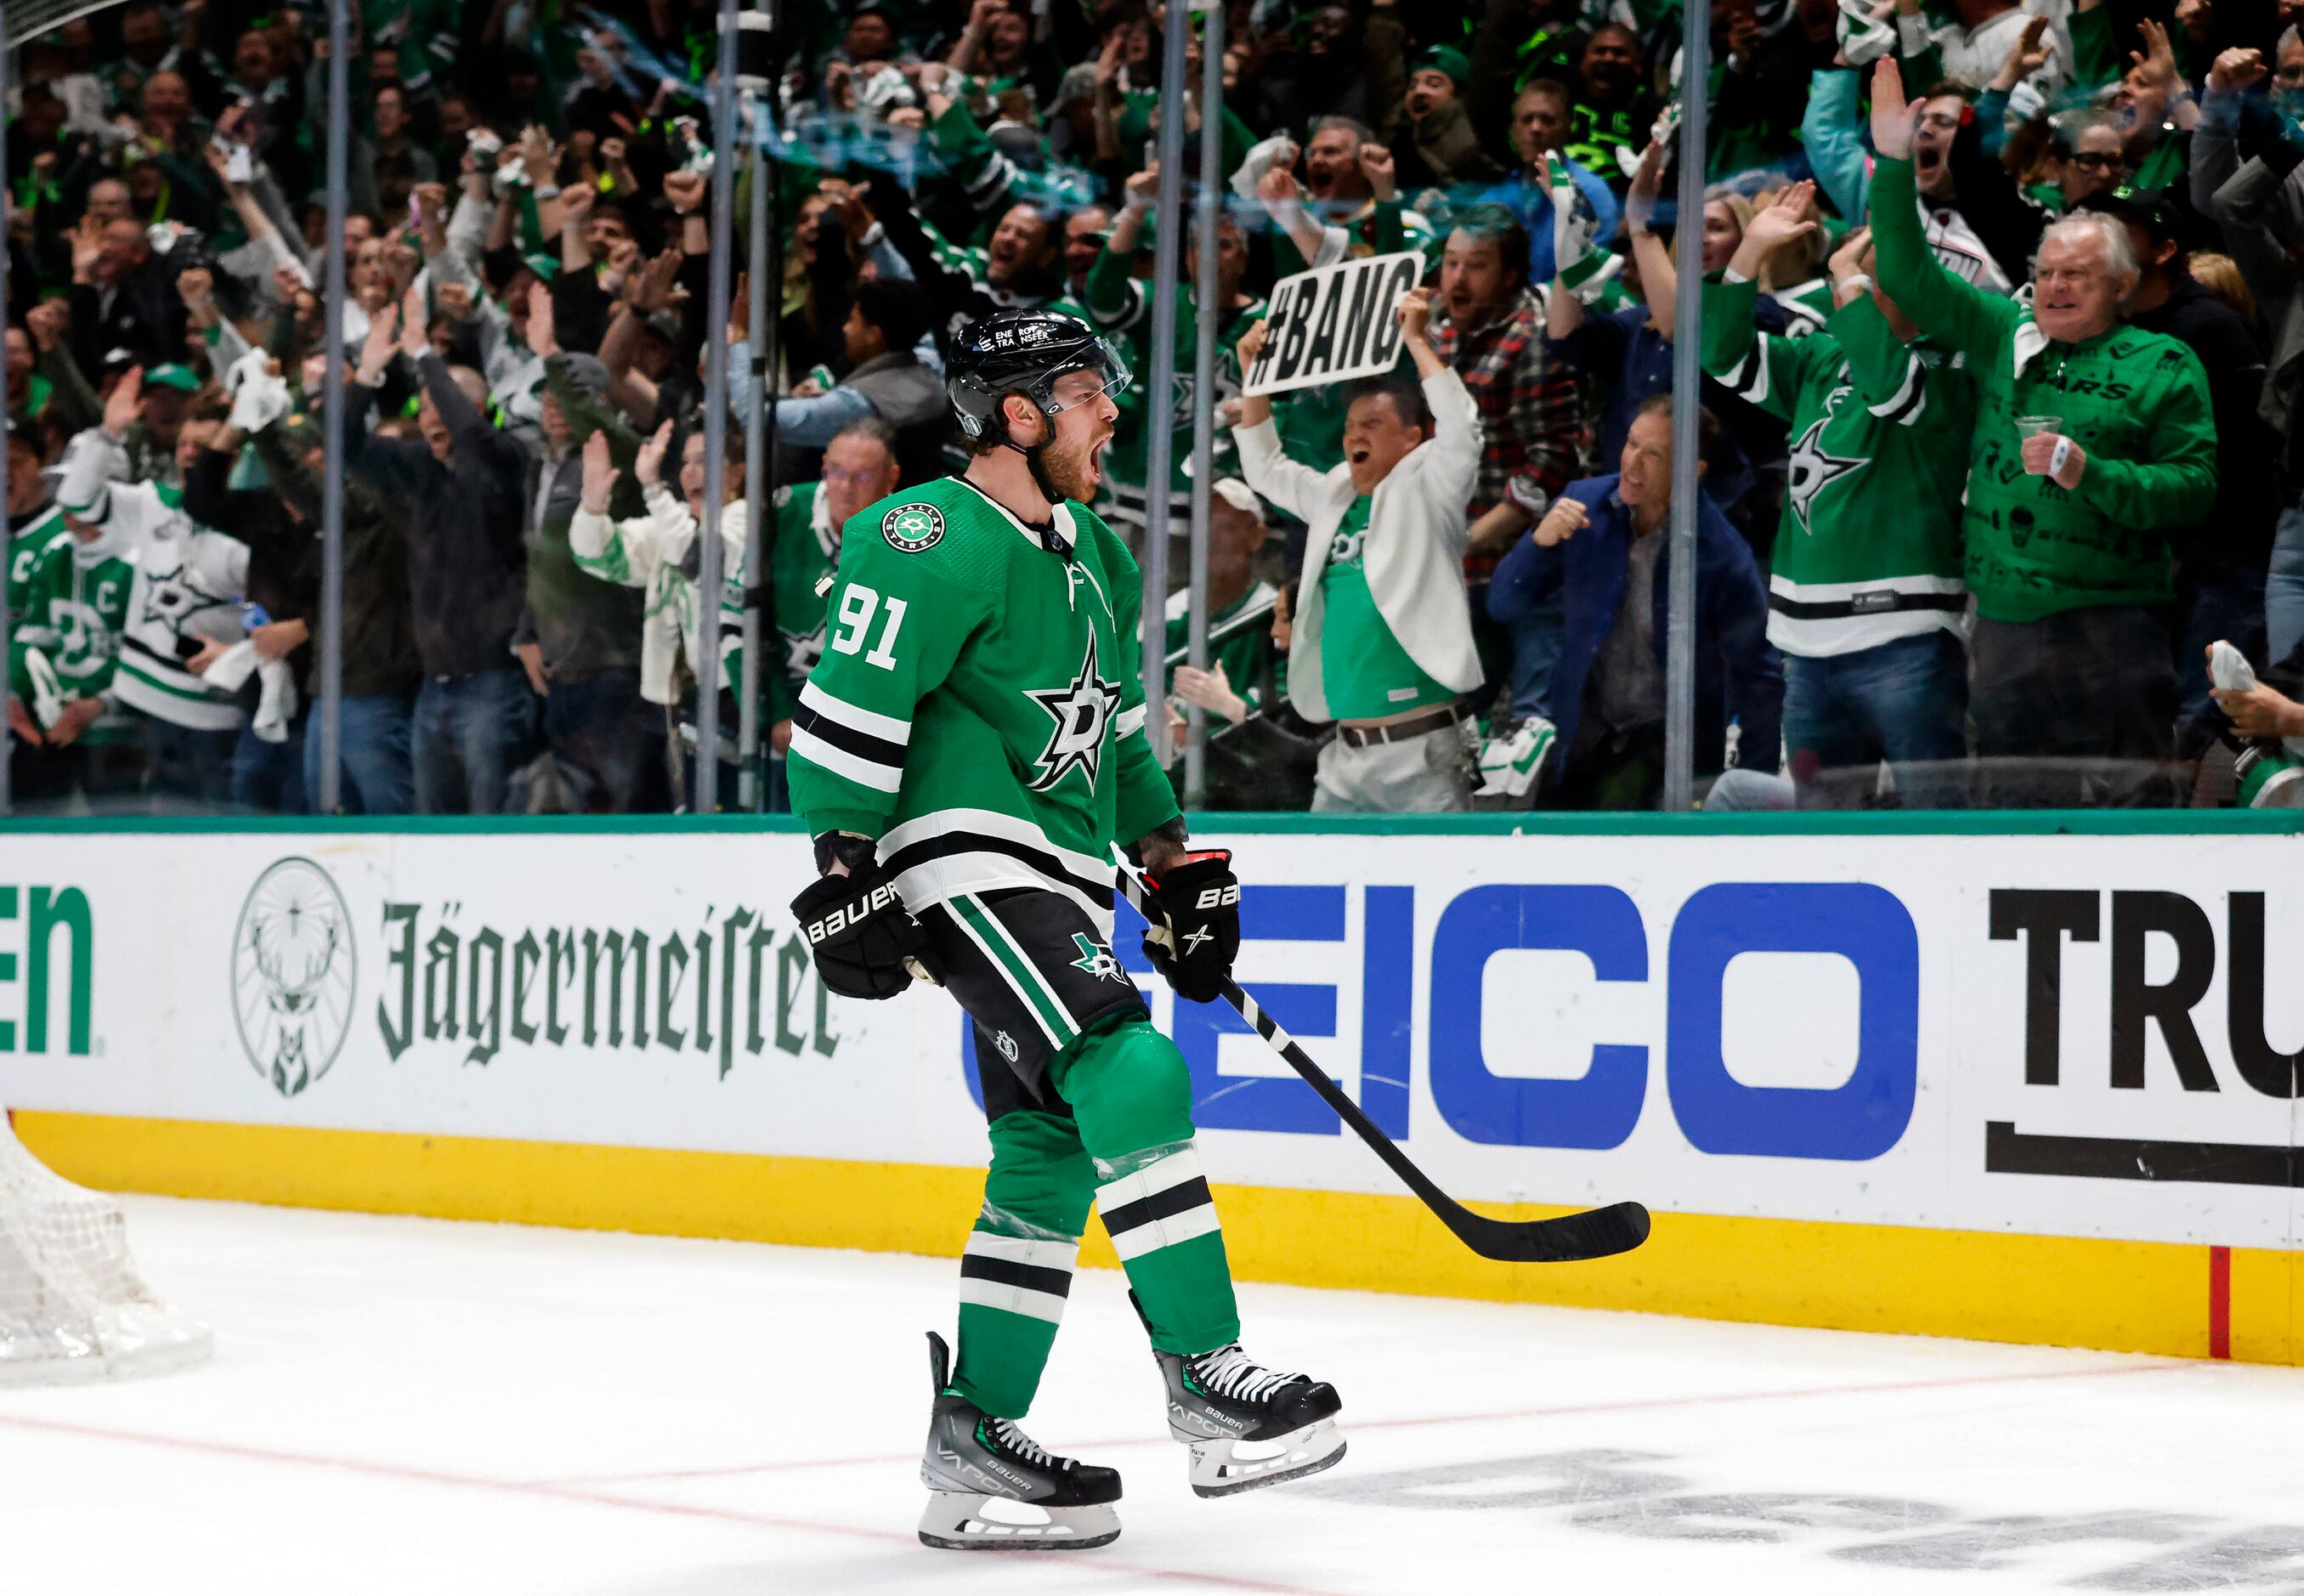 Photos: Hats off to Roope Hintz and the Dallas Stars' Game 2 victory